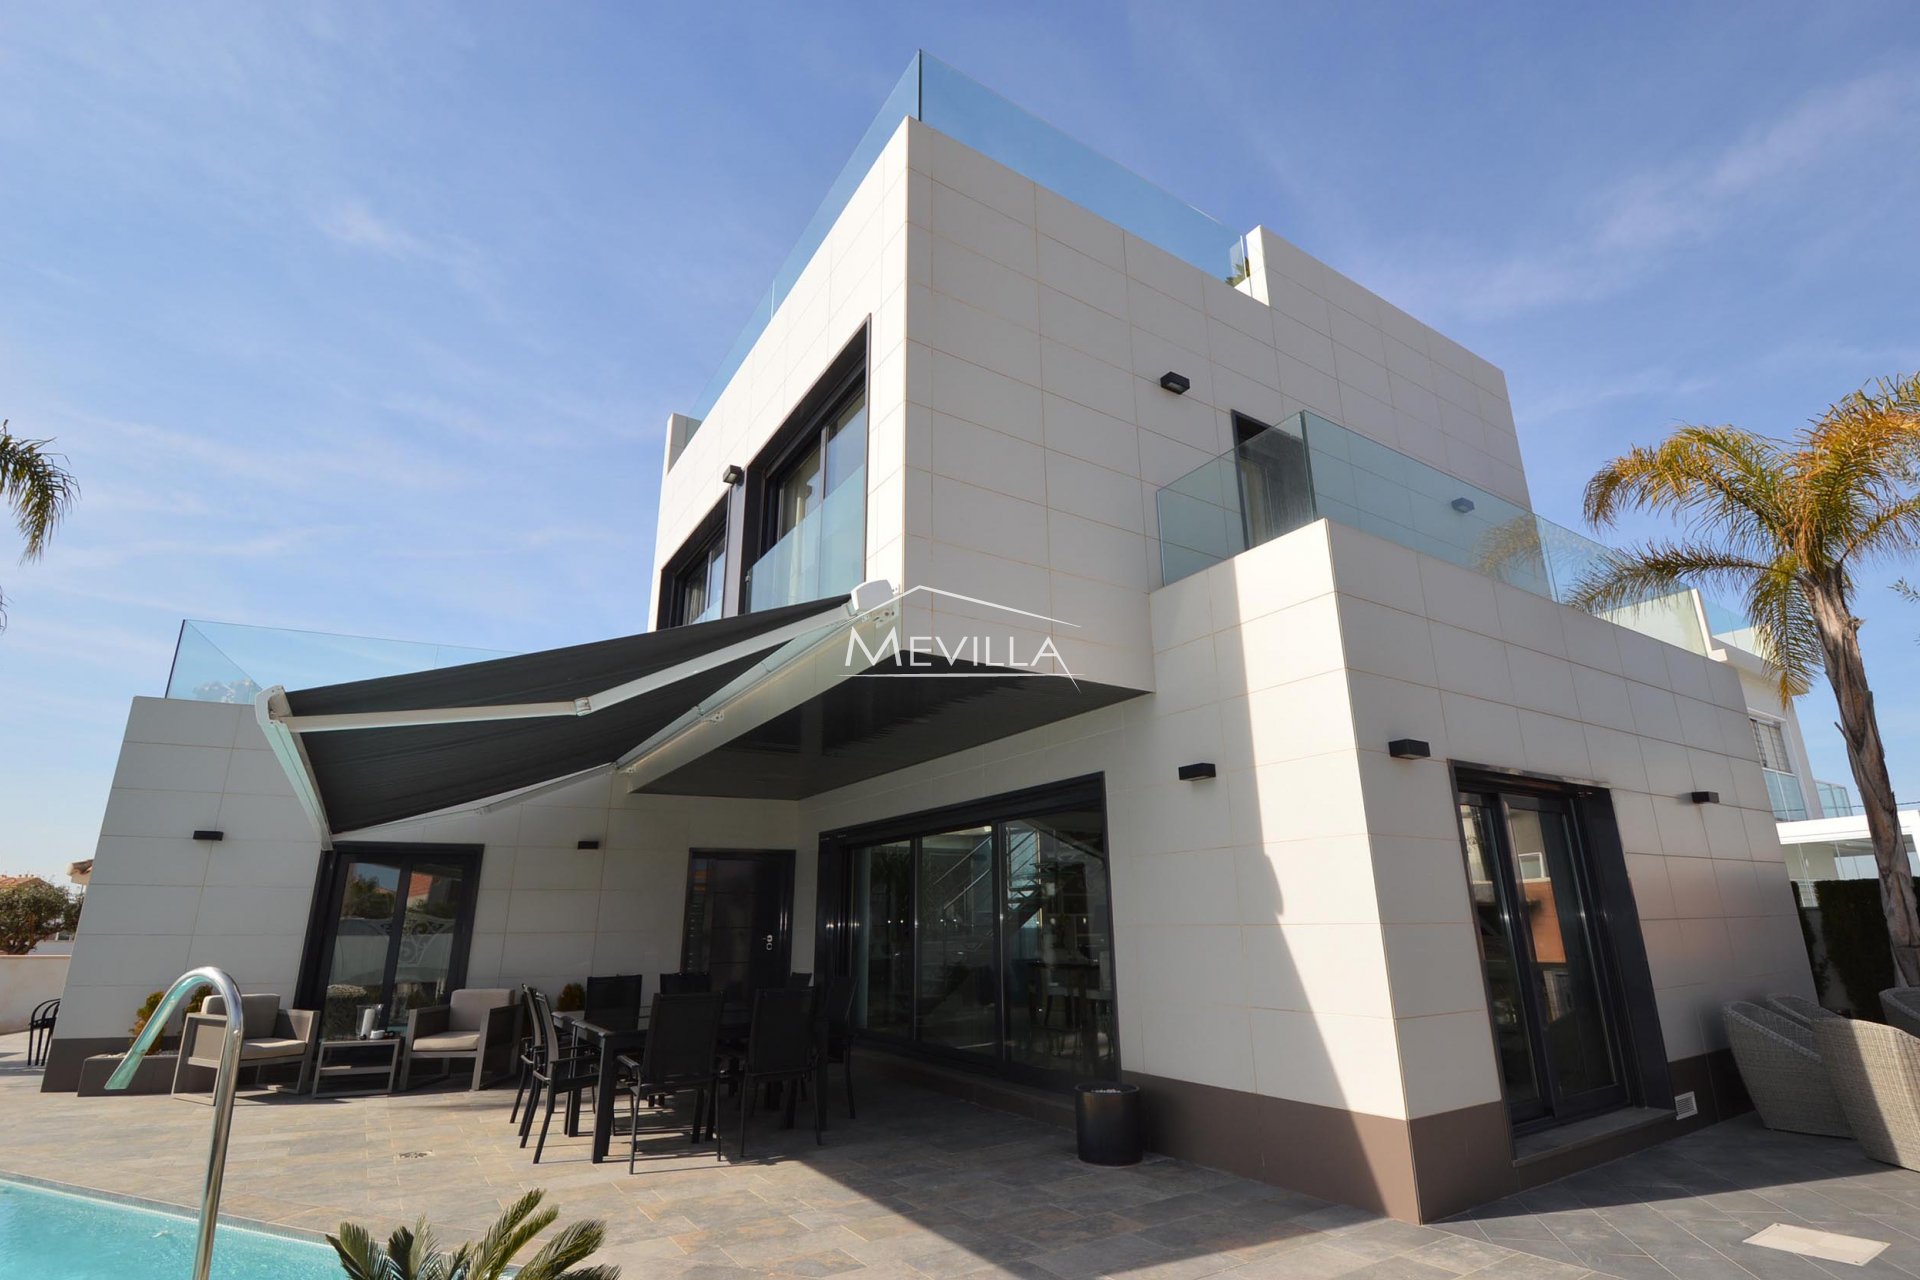 LUXURY VILLA WITH MODERN DESIGN IN CAMPOAMOR FOR SALE.